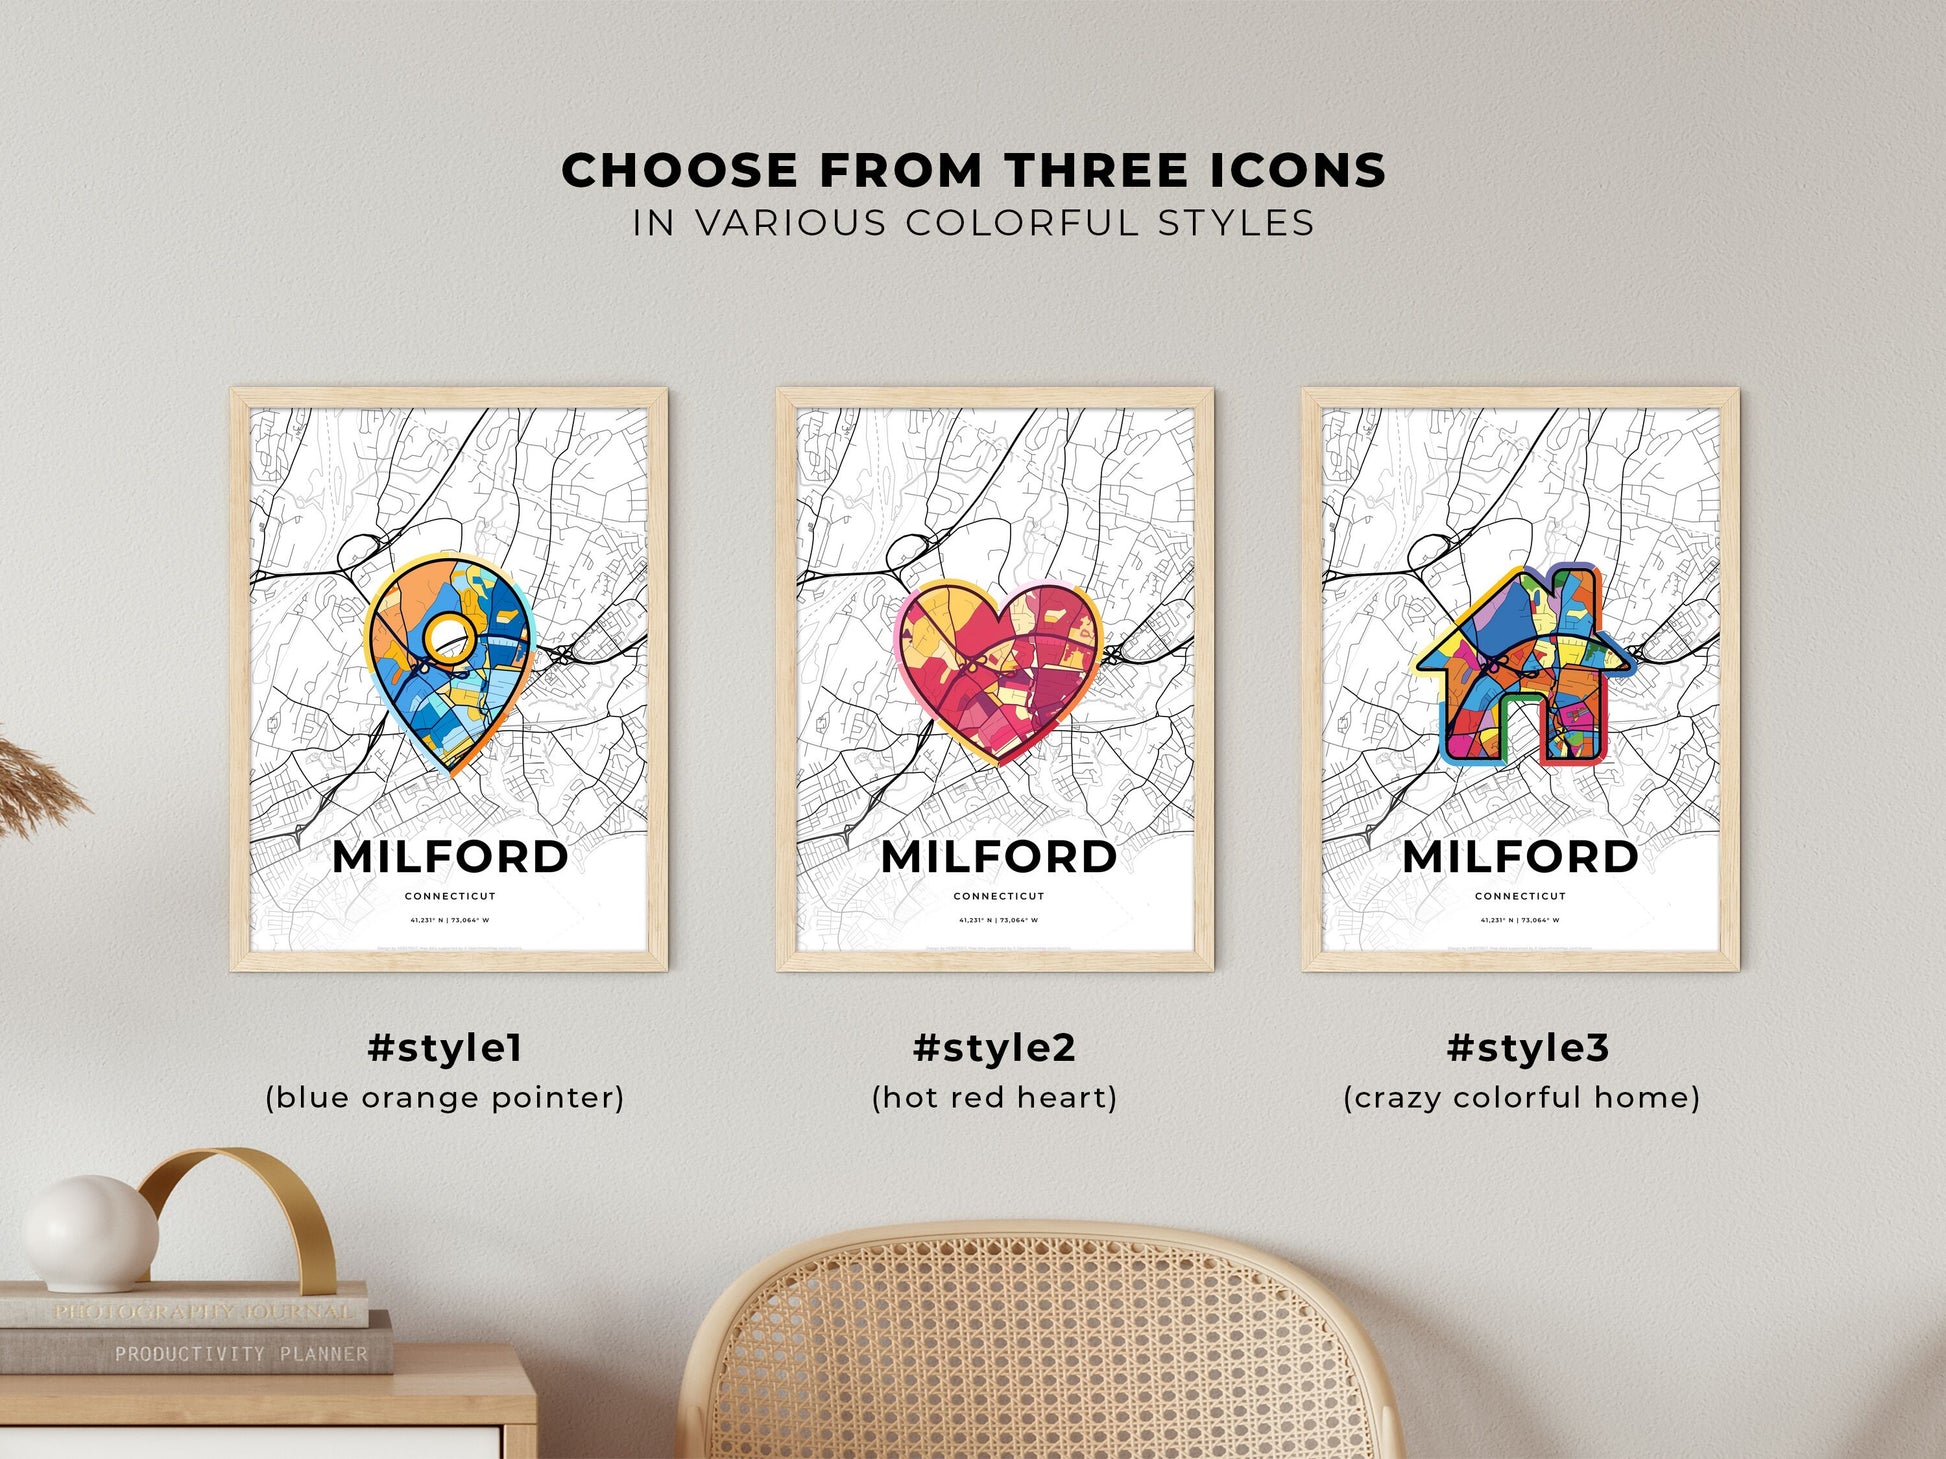 MILFORD CONNECTICUT minimal art map with a colorful icon.